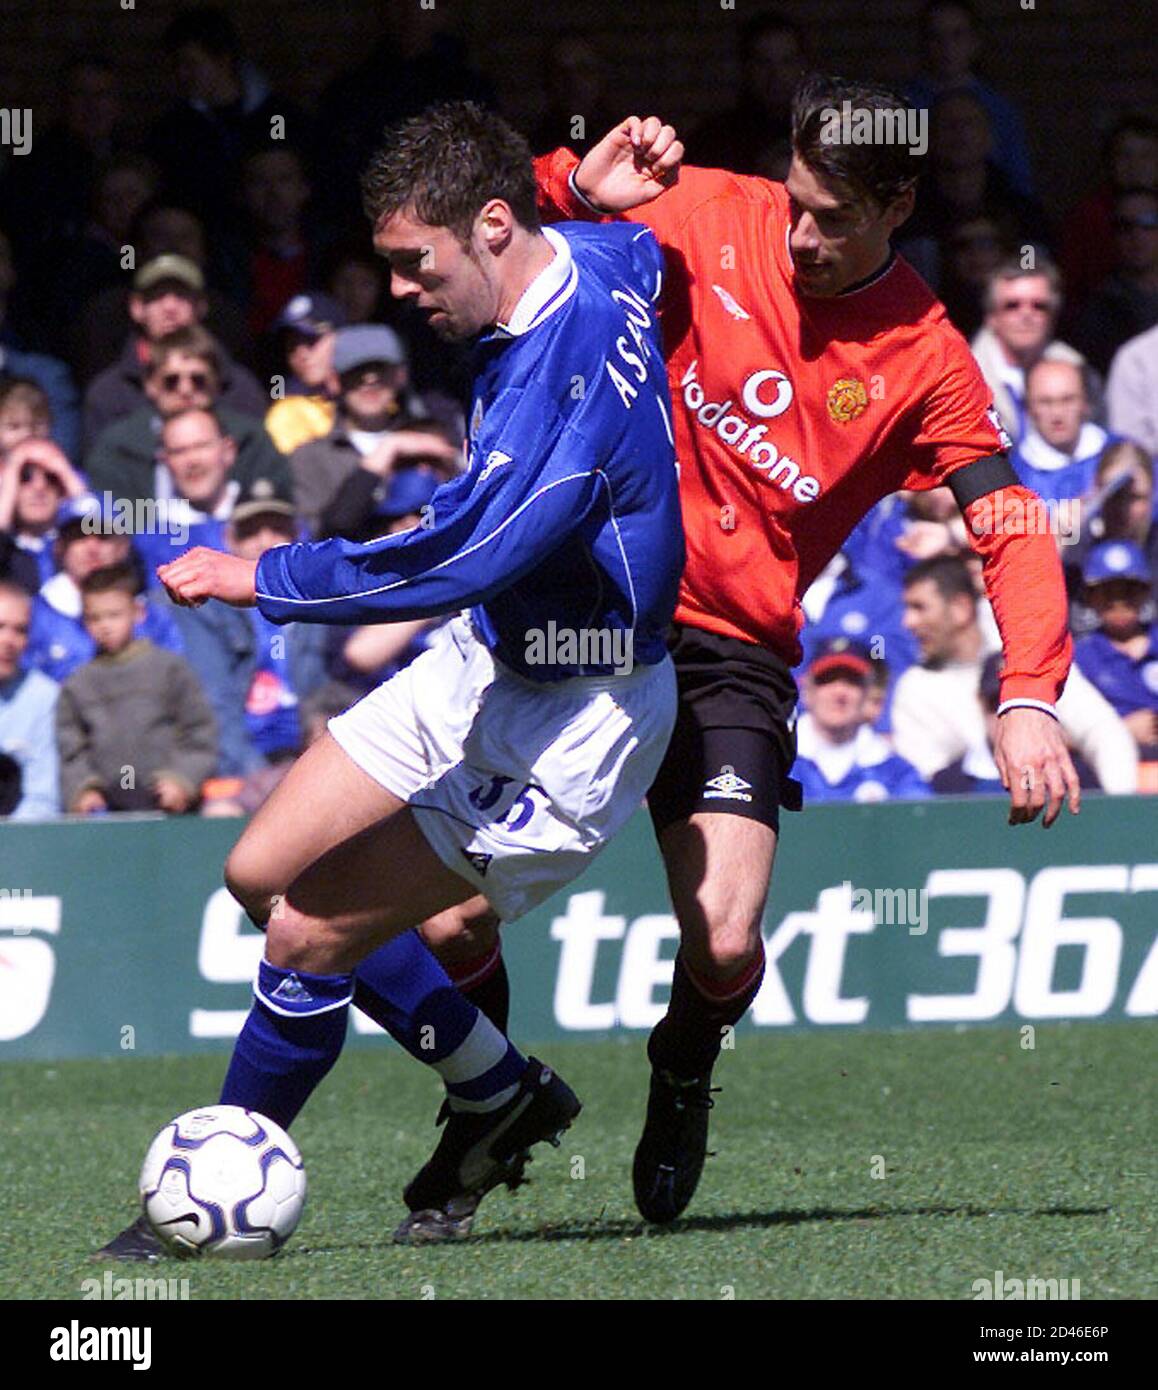 Manchester United's Dutch player Ruud Van Nistelrooy (R) tries to tackle  Leicester City's Jon Ashton during their English premier league match at  Filbert Street, April 6, 2002. Manchester United won the match